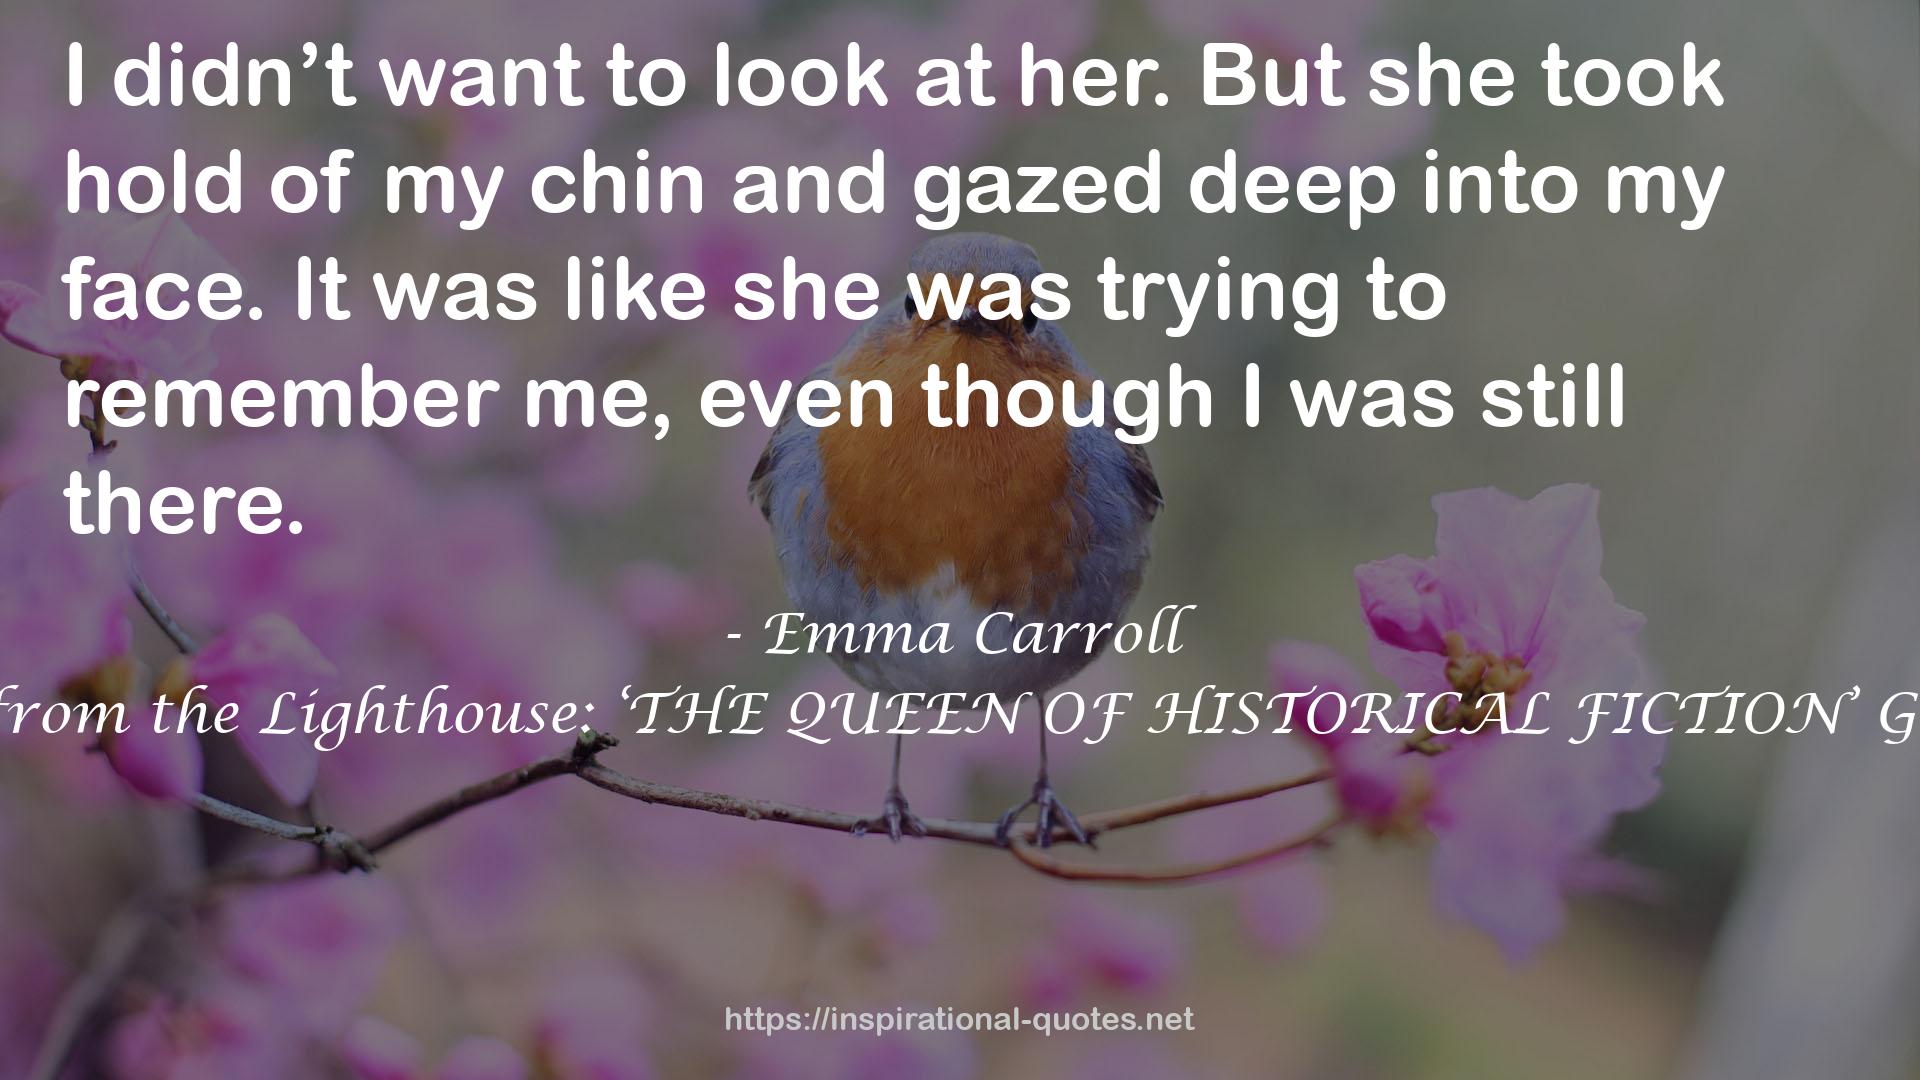 Letters from the Lighthouse: ‘THE QUEEN OF HISTORICAL FICTION’ Guardian QUOTES